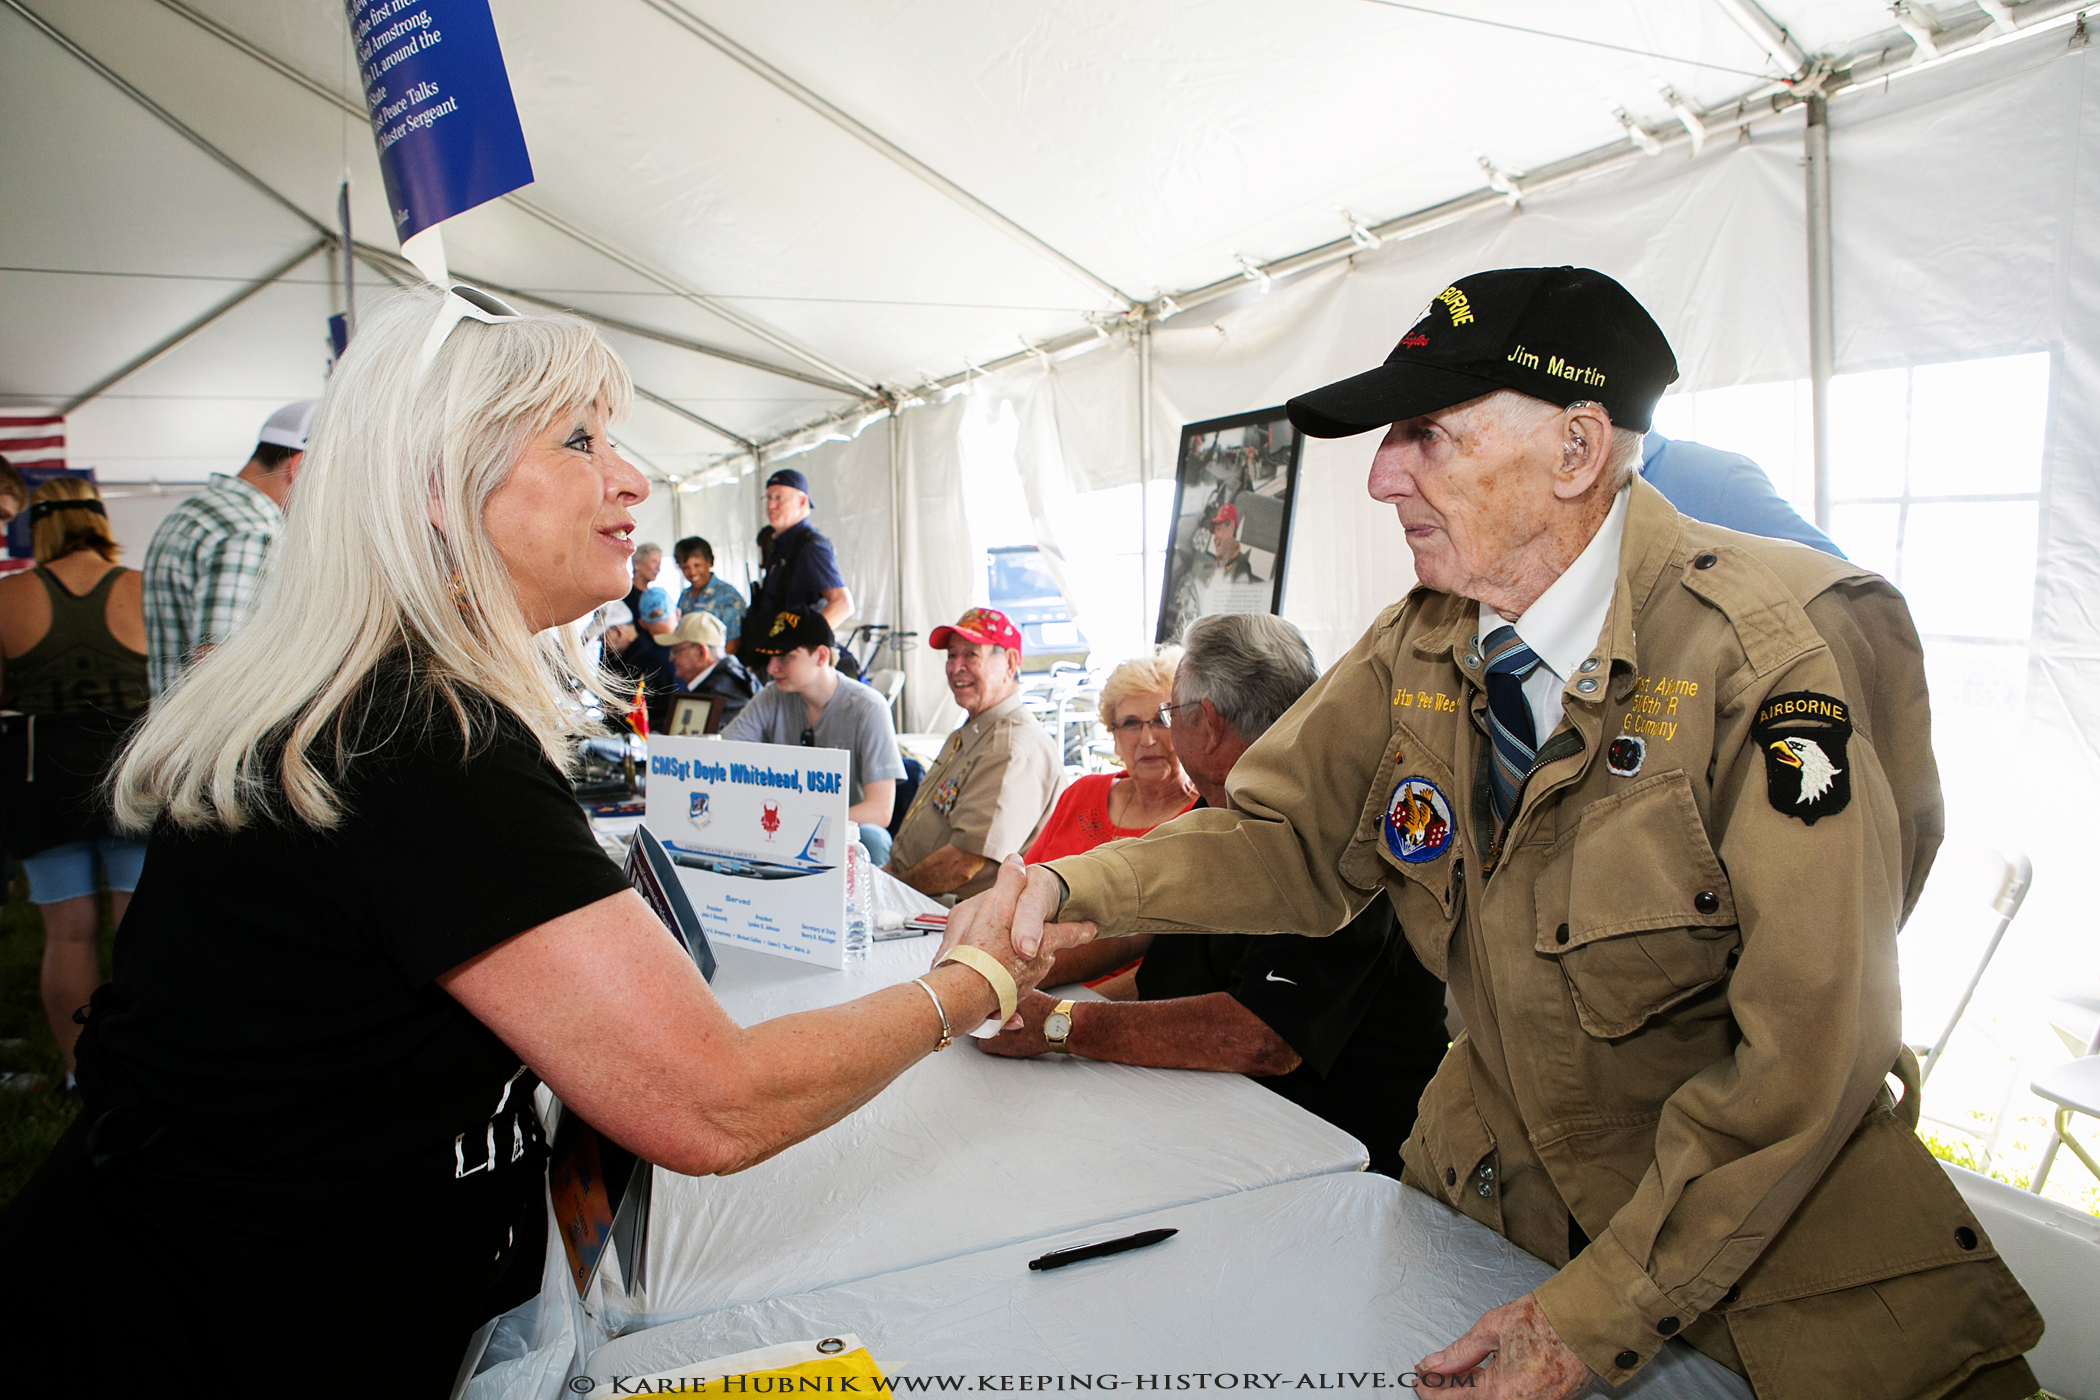 Come meet legendary aviators in the Legends and Heroes Tent. (photo via WOH)